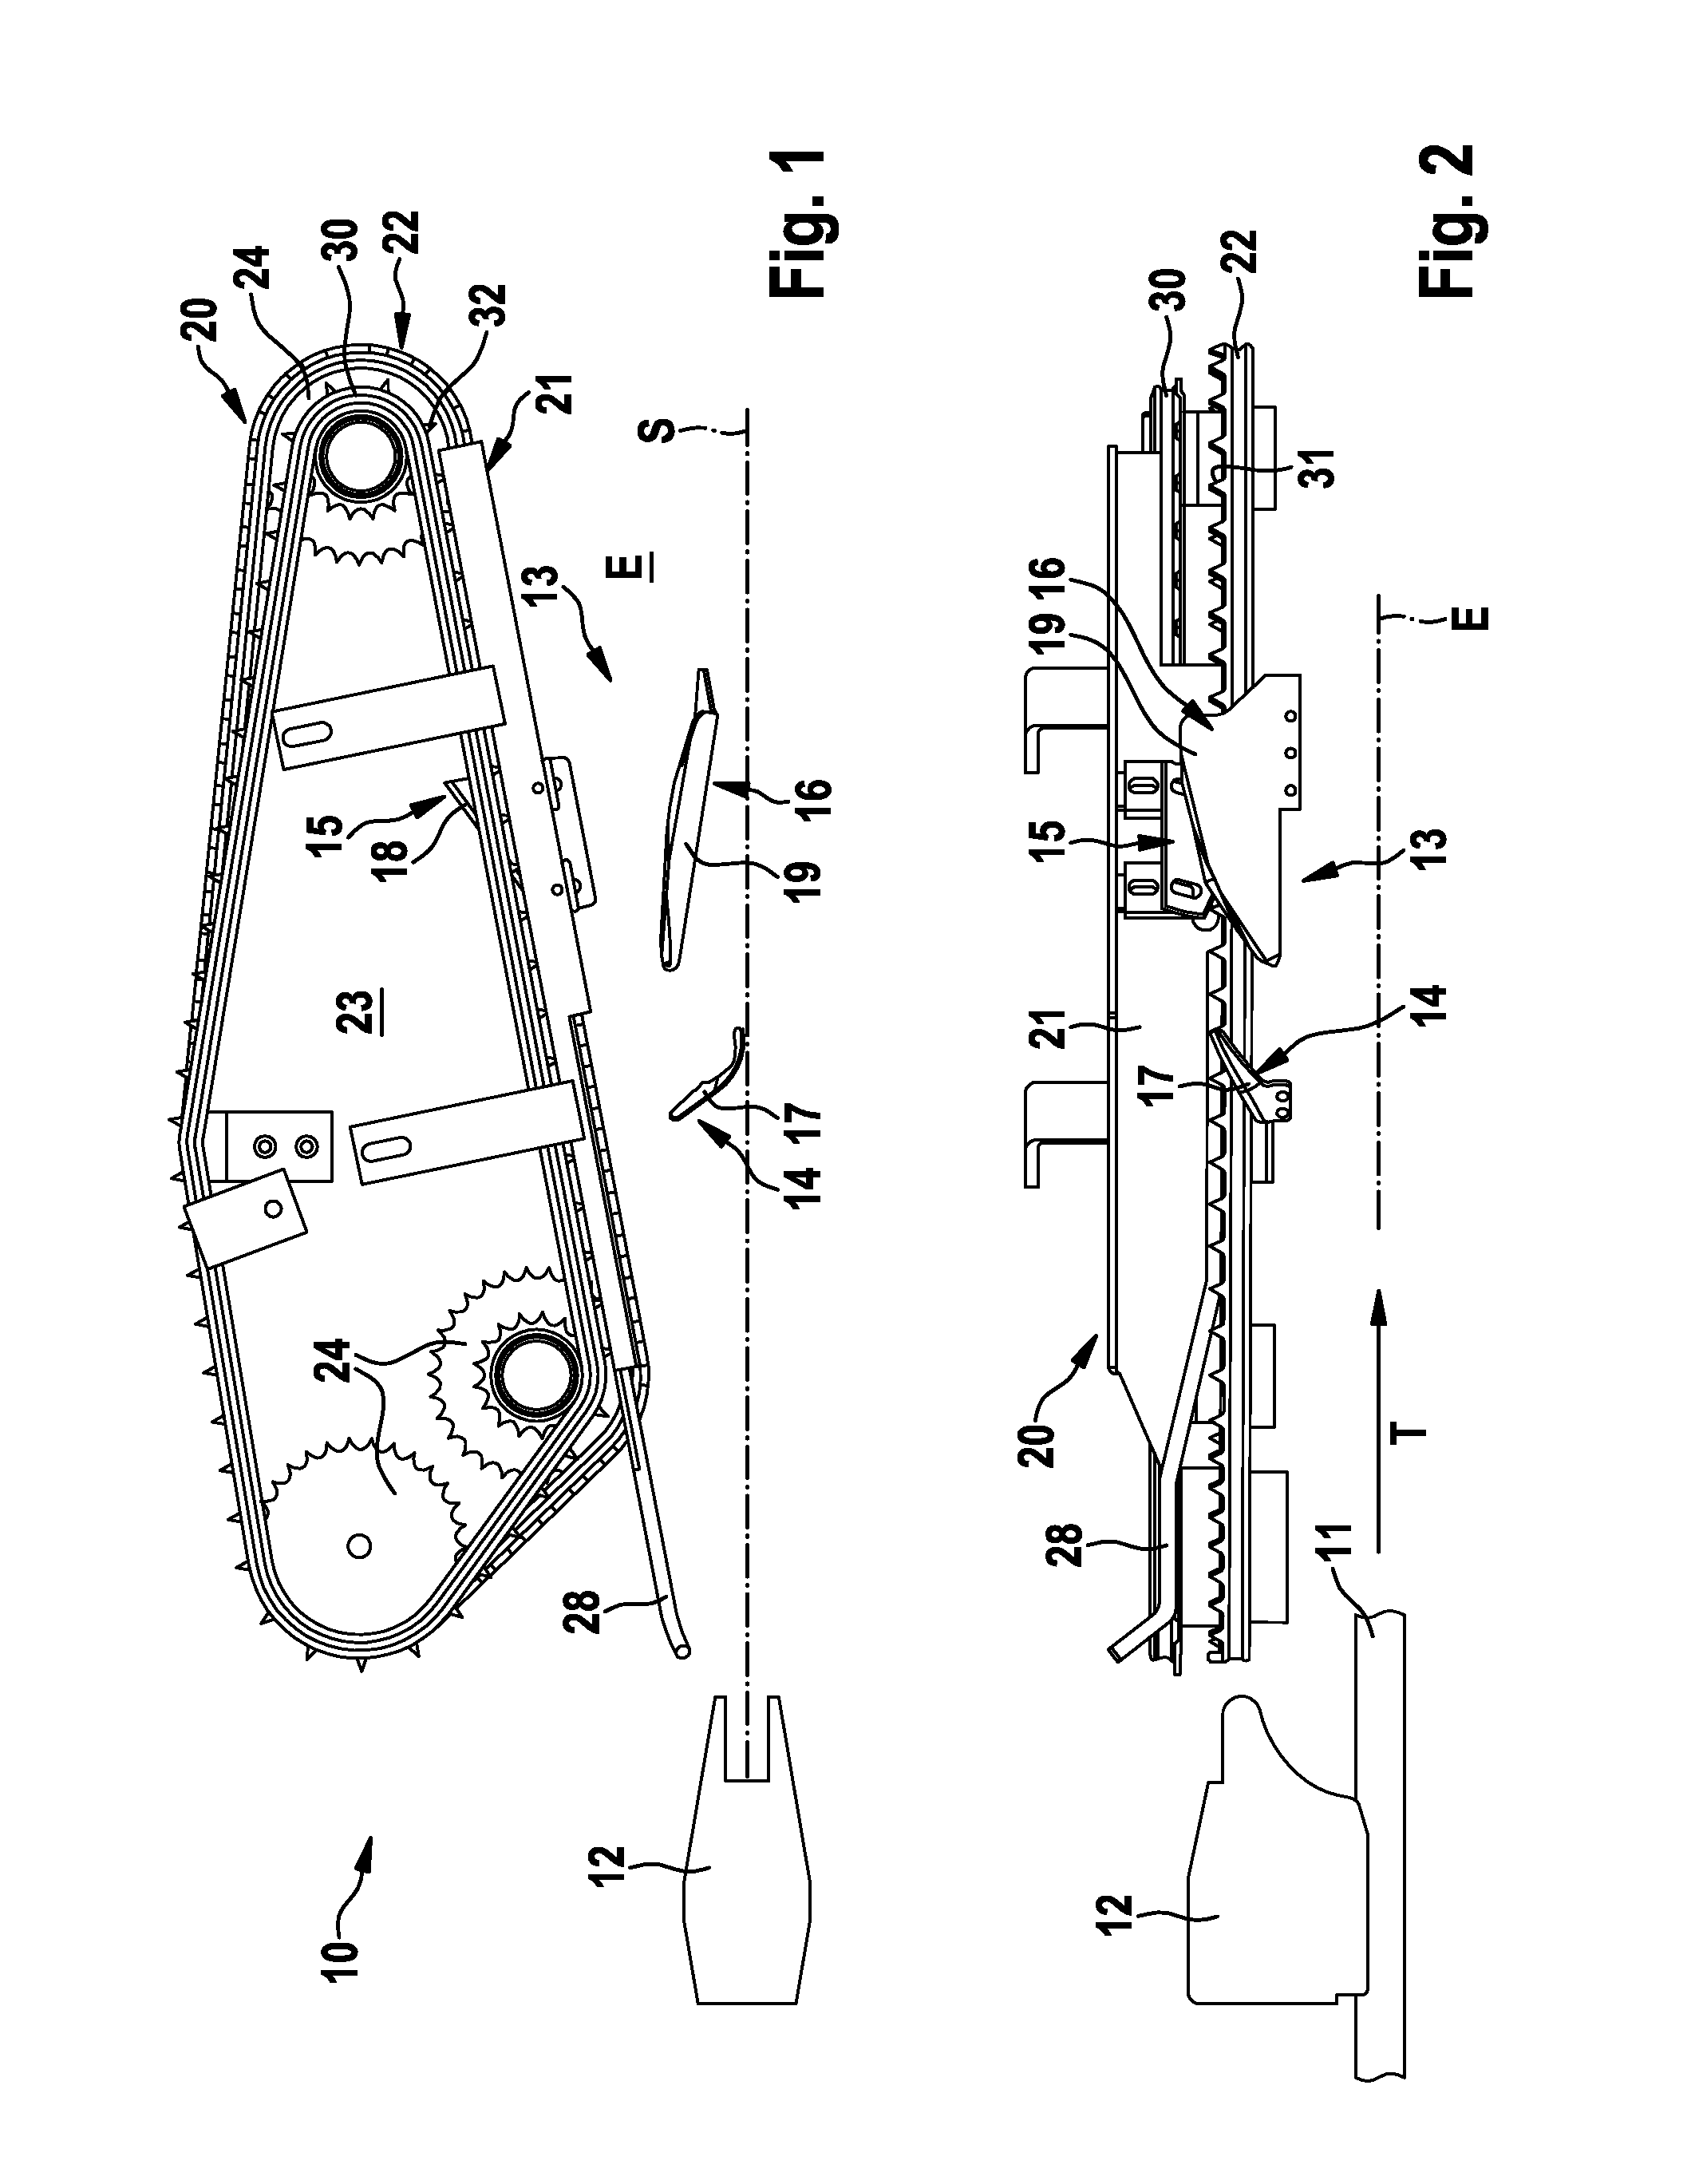 Apparatus and method for automated cutting of the wings from poultry bodies